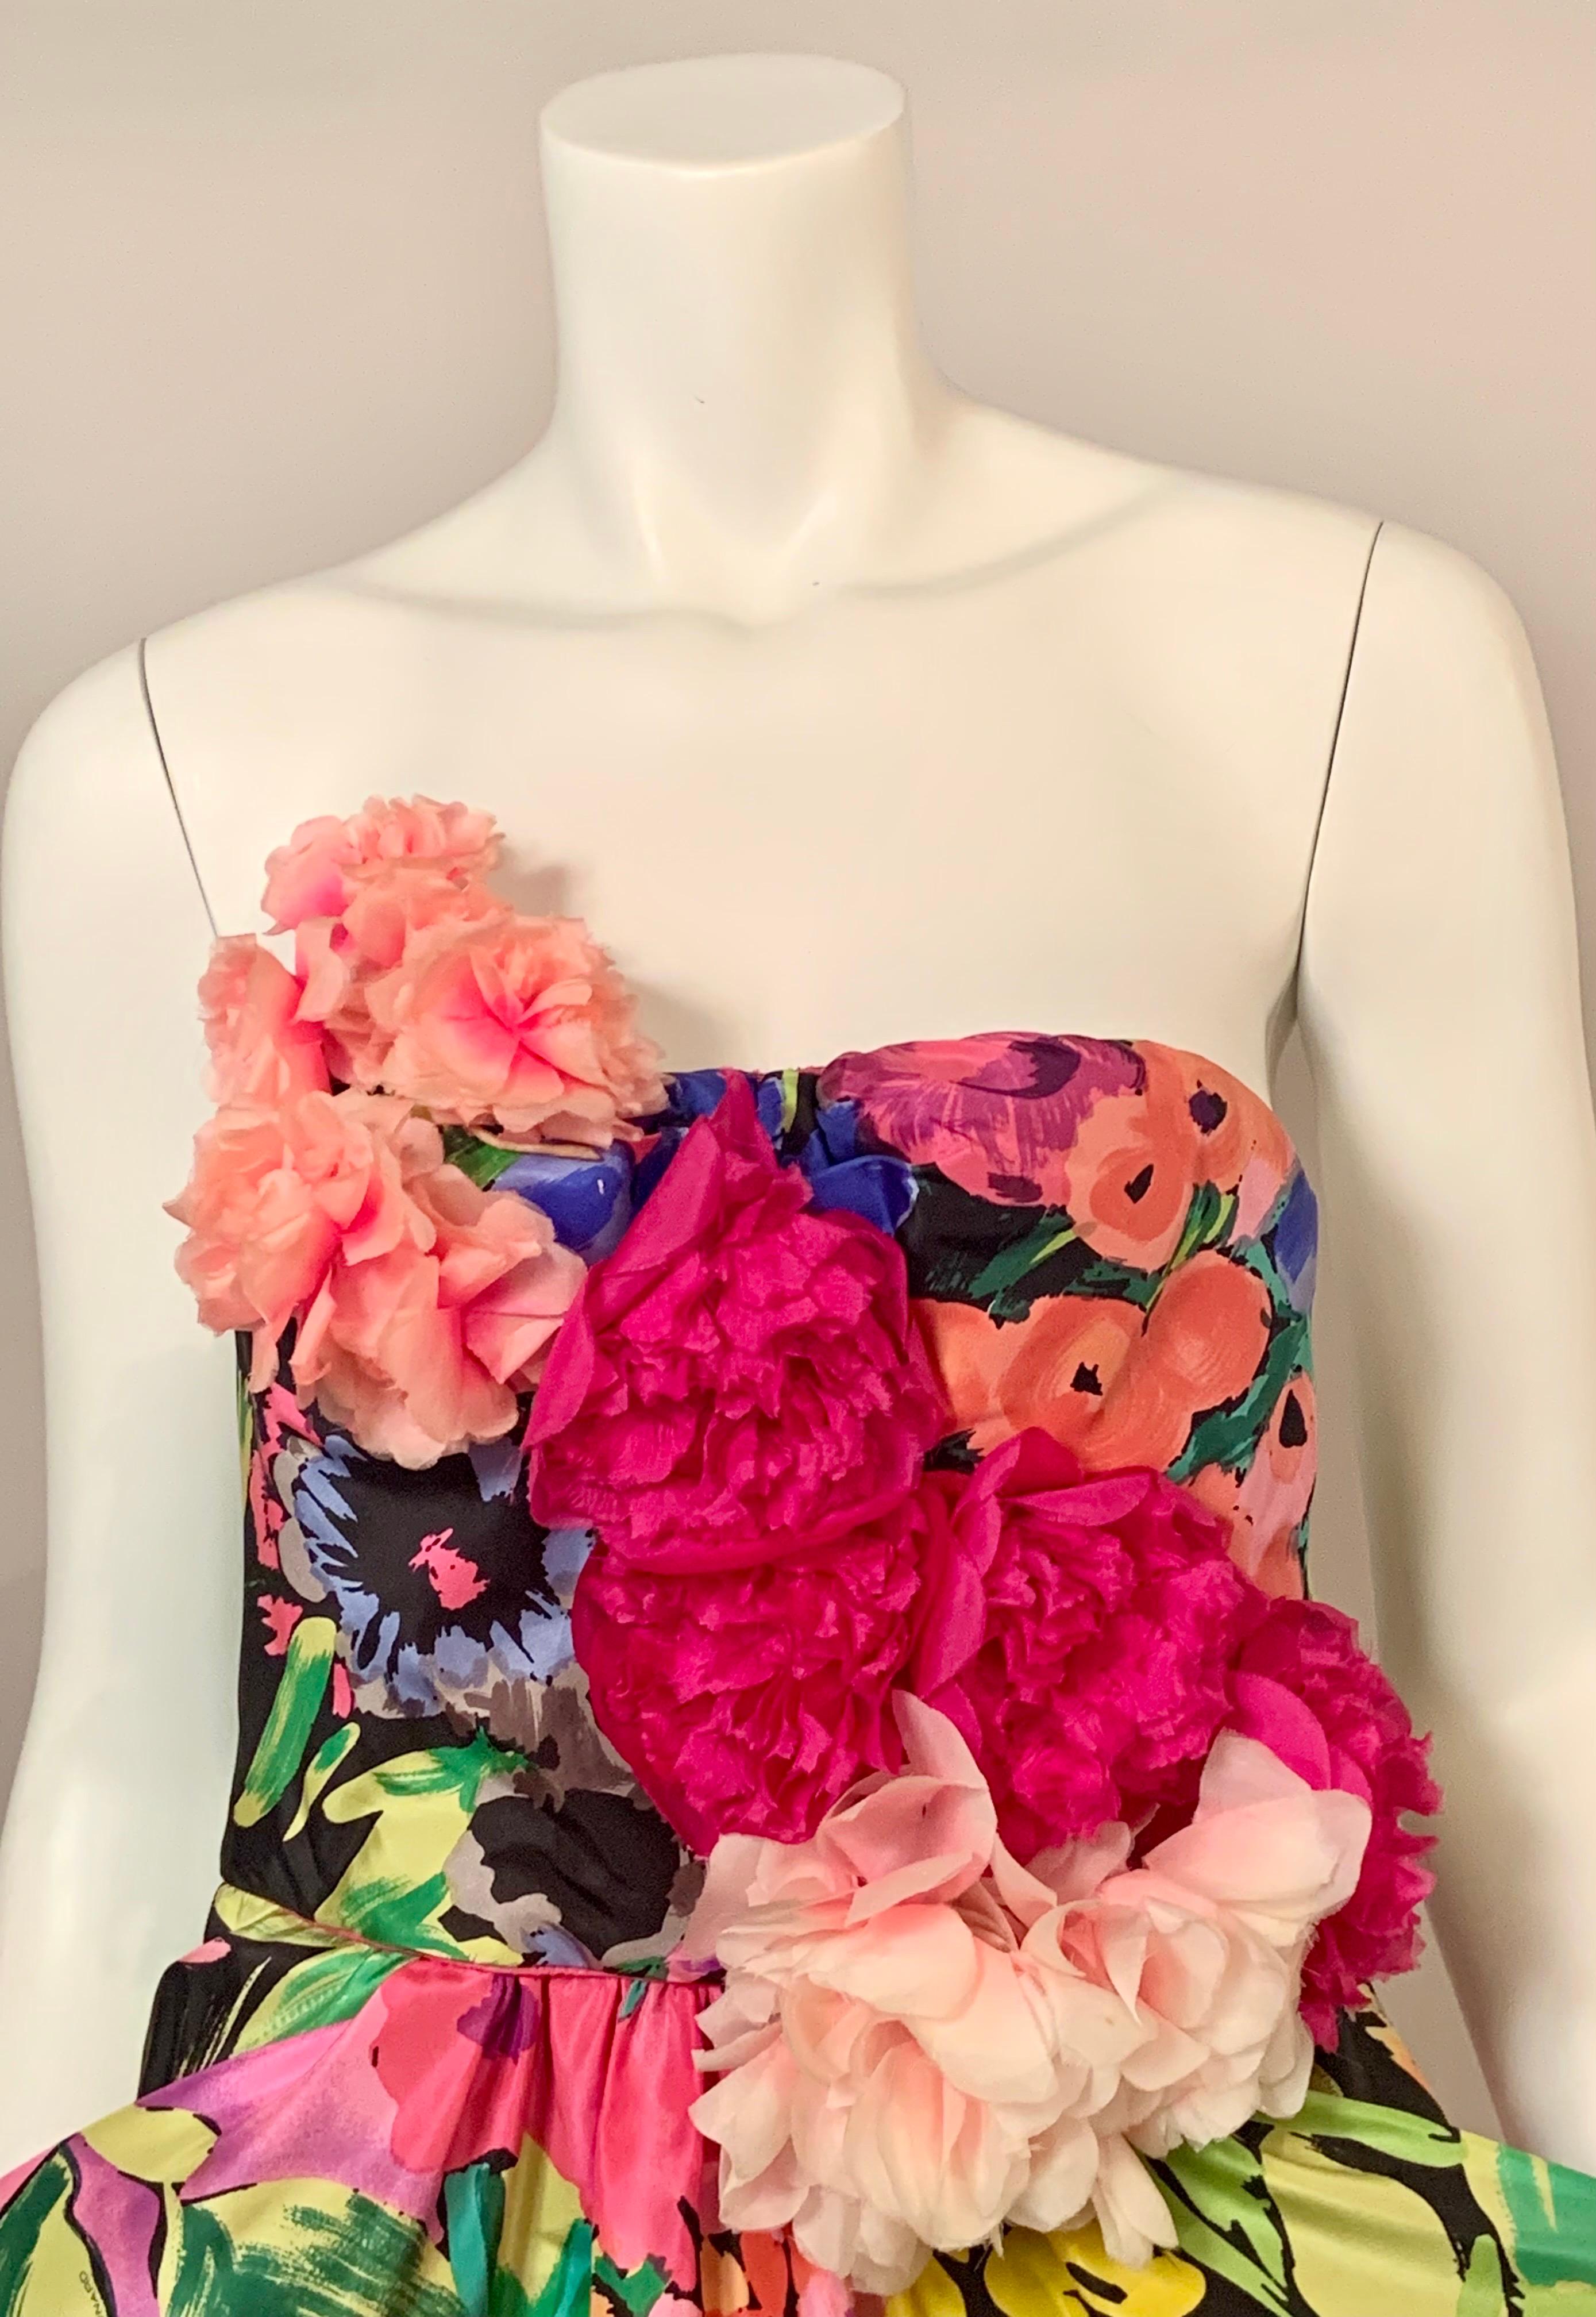 This strapless dress from Leonard, Paris is just so cheerful and feminine.  The floral print seems to have every shade of every color under the rainbow set against a black background.  There is even a great border print at the hemline.  The bodice